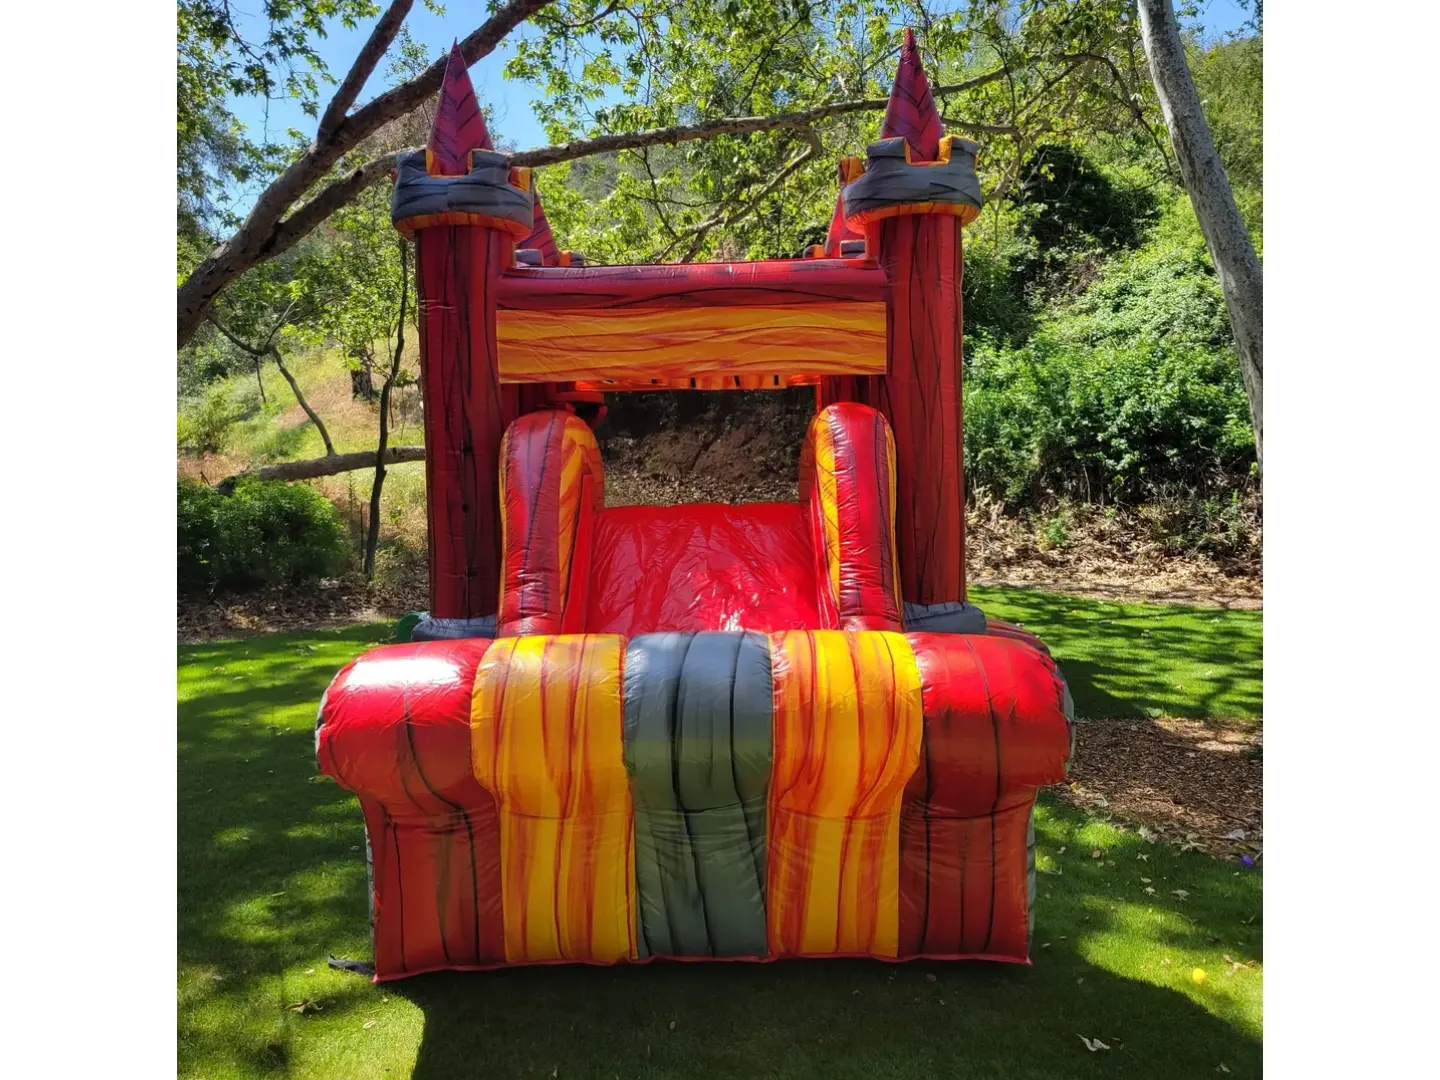 A red and yellow inflatable castle in the middle of a park.